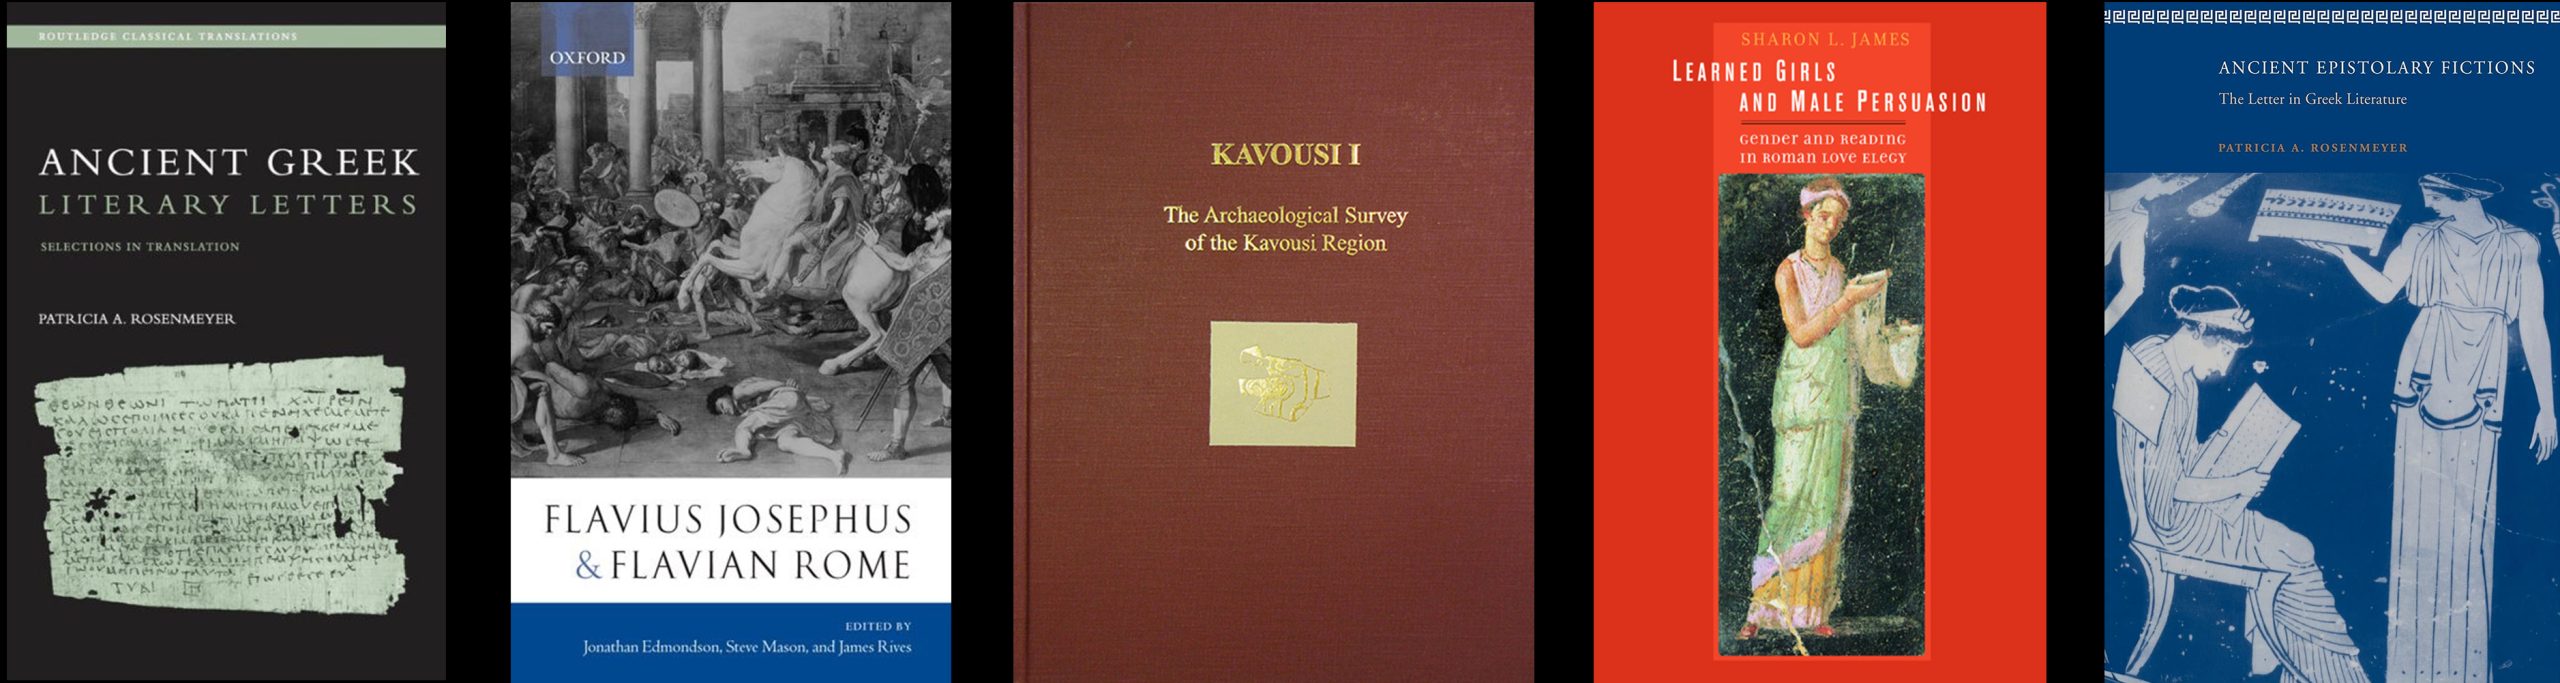 1. Ancient Greek Literary Letters: Selections in Translation by Patricia A. Rosenmeyer. 2. Flavius Josephus and Flavian Rome edited by Jonathan Edmonson, Steve Mason, and James Rives. 3. Kavousi I: The Archaeological Survey of the Kavousi Region. 4. Learned Girls and Male Persuasion: Gender and Reading the Roman Love Elegy by Sharon L. James. 5. Ancient Epistolary Fictions: The Letter in Greek Literature by Patricia A. Rosenmeyer.